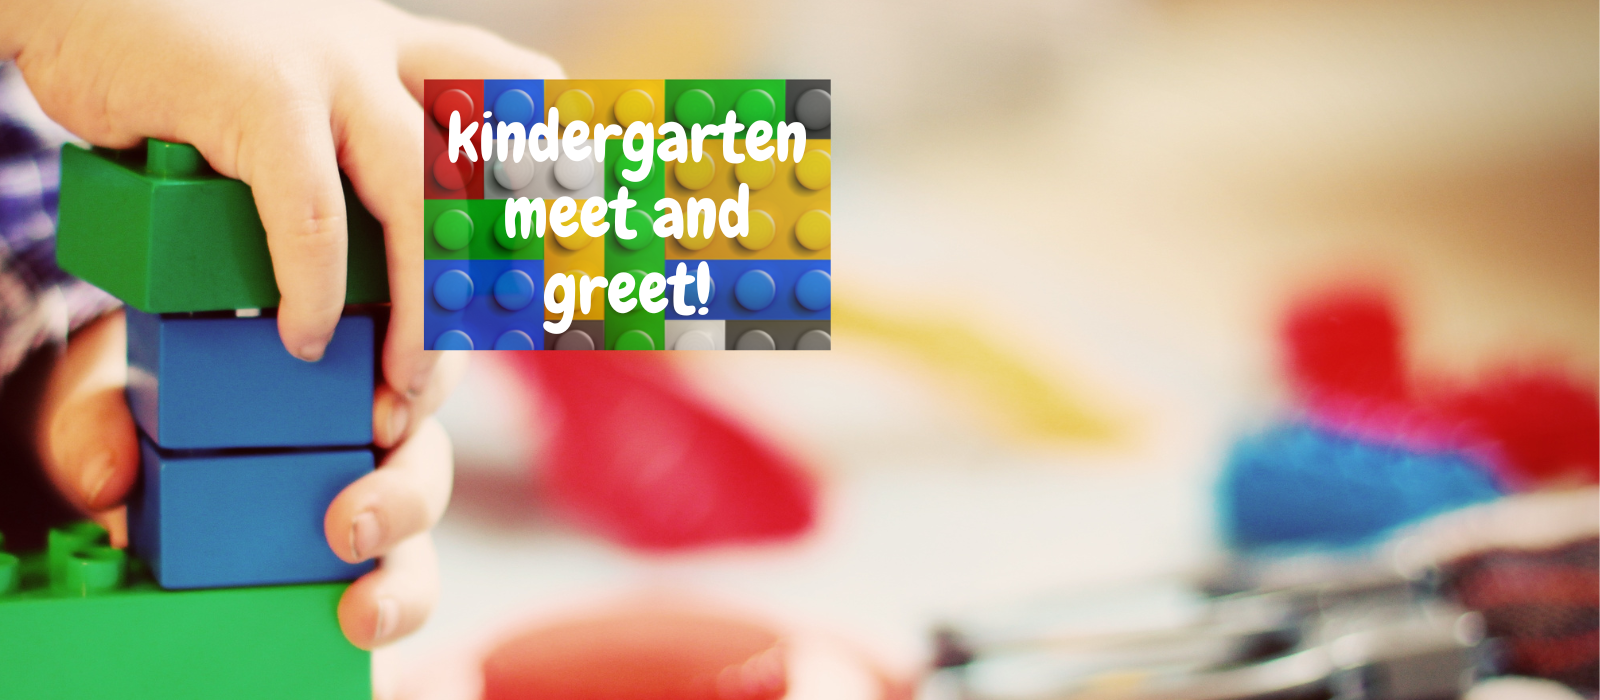 <h2>Register Now</h2>
<p>Check out our kindergarten program if you have a child turning 5 on or before Sept. 1, 2023!<br />
&nbsp;<br />
<a href="https://www.bps101.net/kindergarten/" class="button ">Details Here</a></p>
